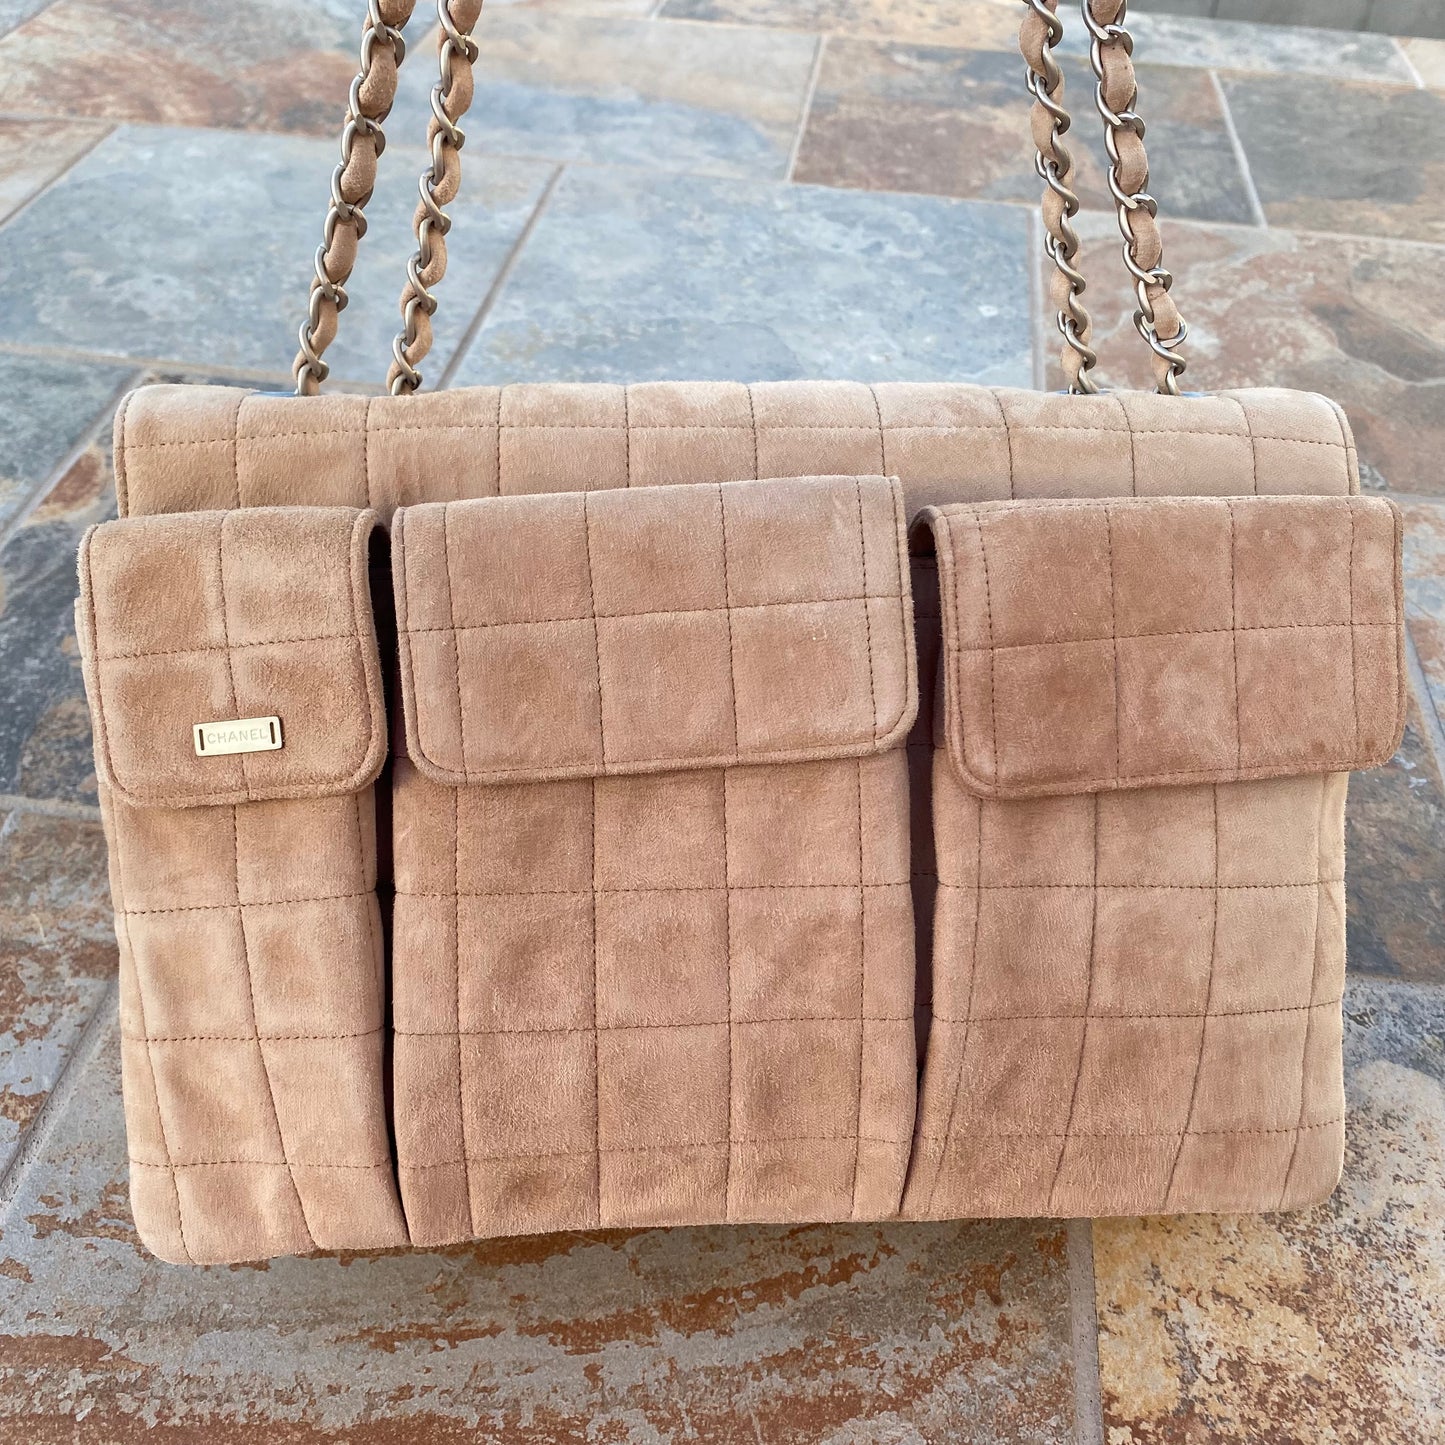 Chanel 2.55 Reissue Quilted Chocolate Bar Jumbo Flap Bag